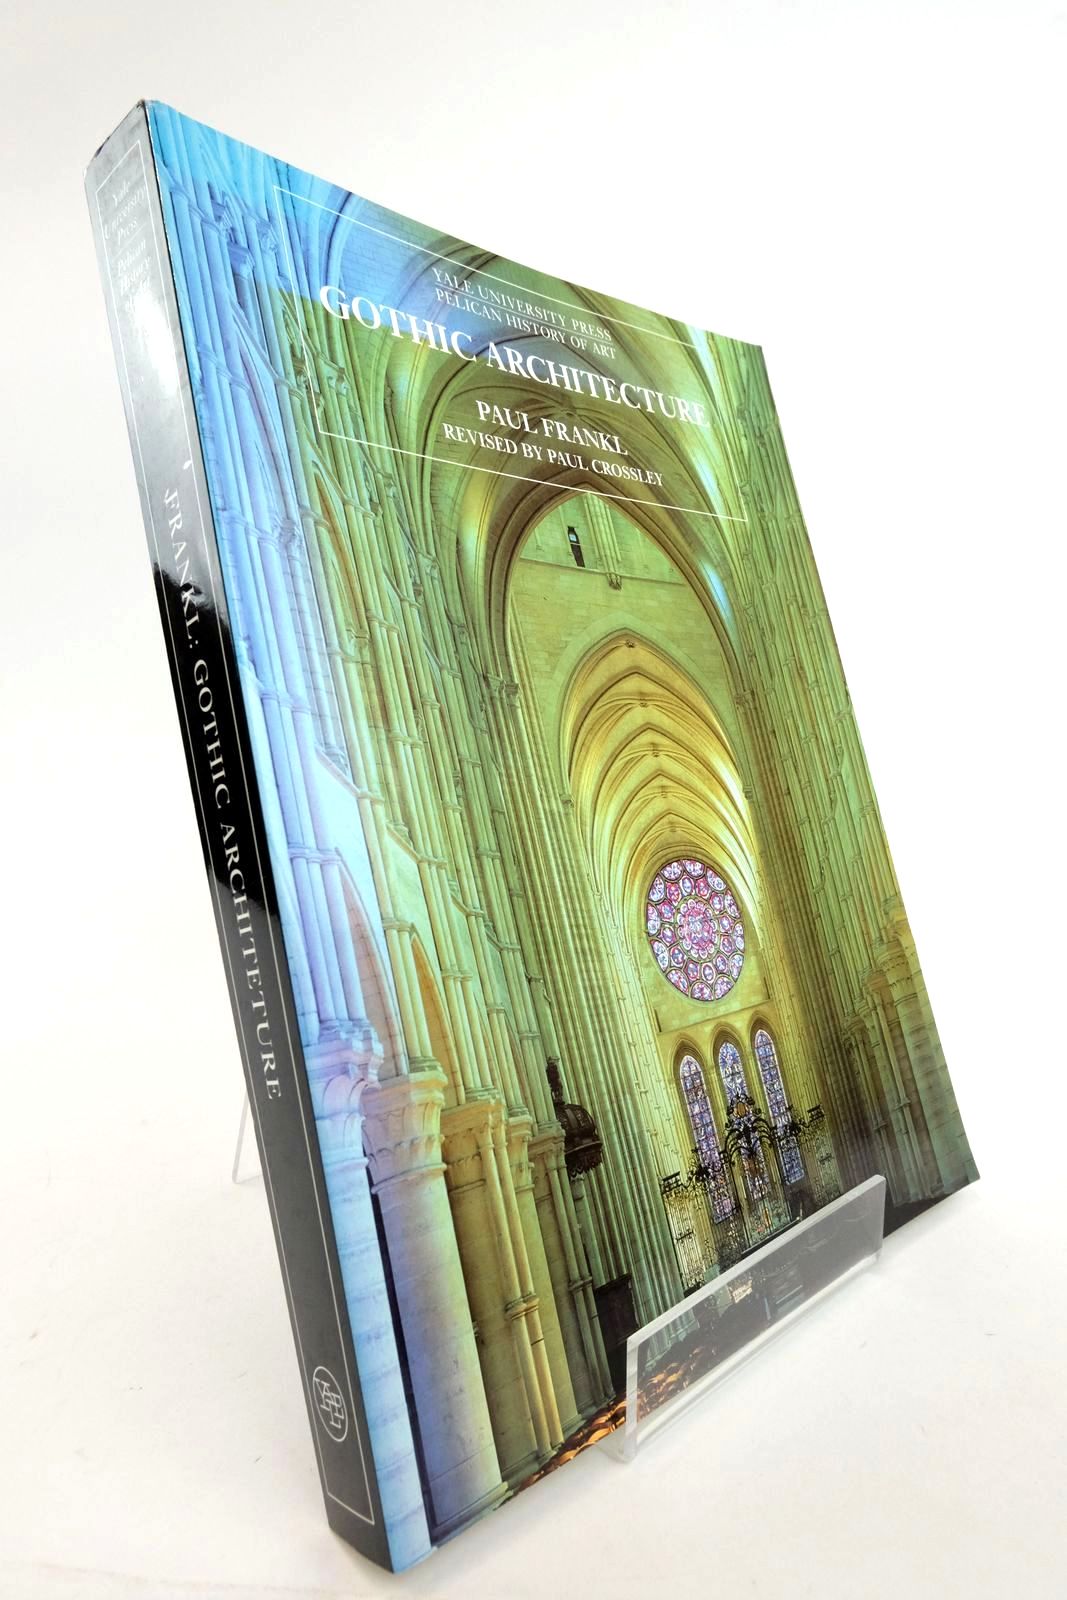 Photo of GOTHIC ARCHITECTURE written by Frankl, Paul
Crossley, Paul published by Yale University Press (STOCK CODE: 2136647)  for sale by Stella & Rose's Books